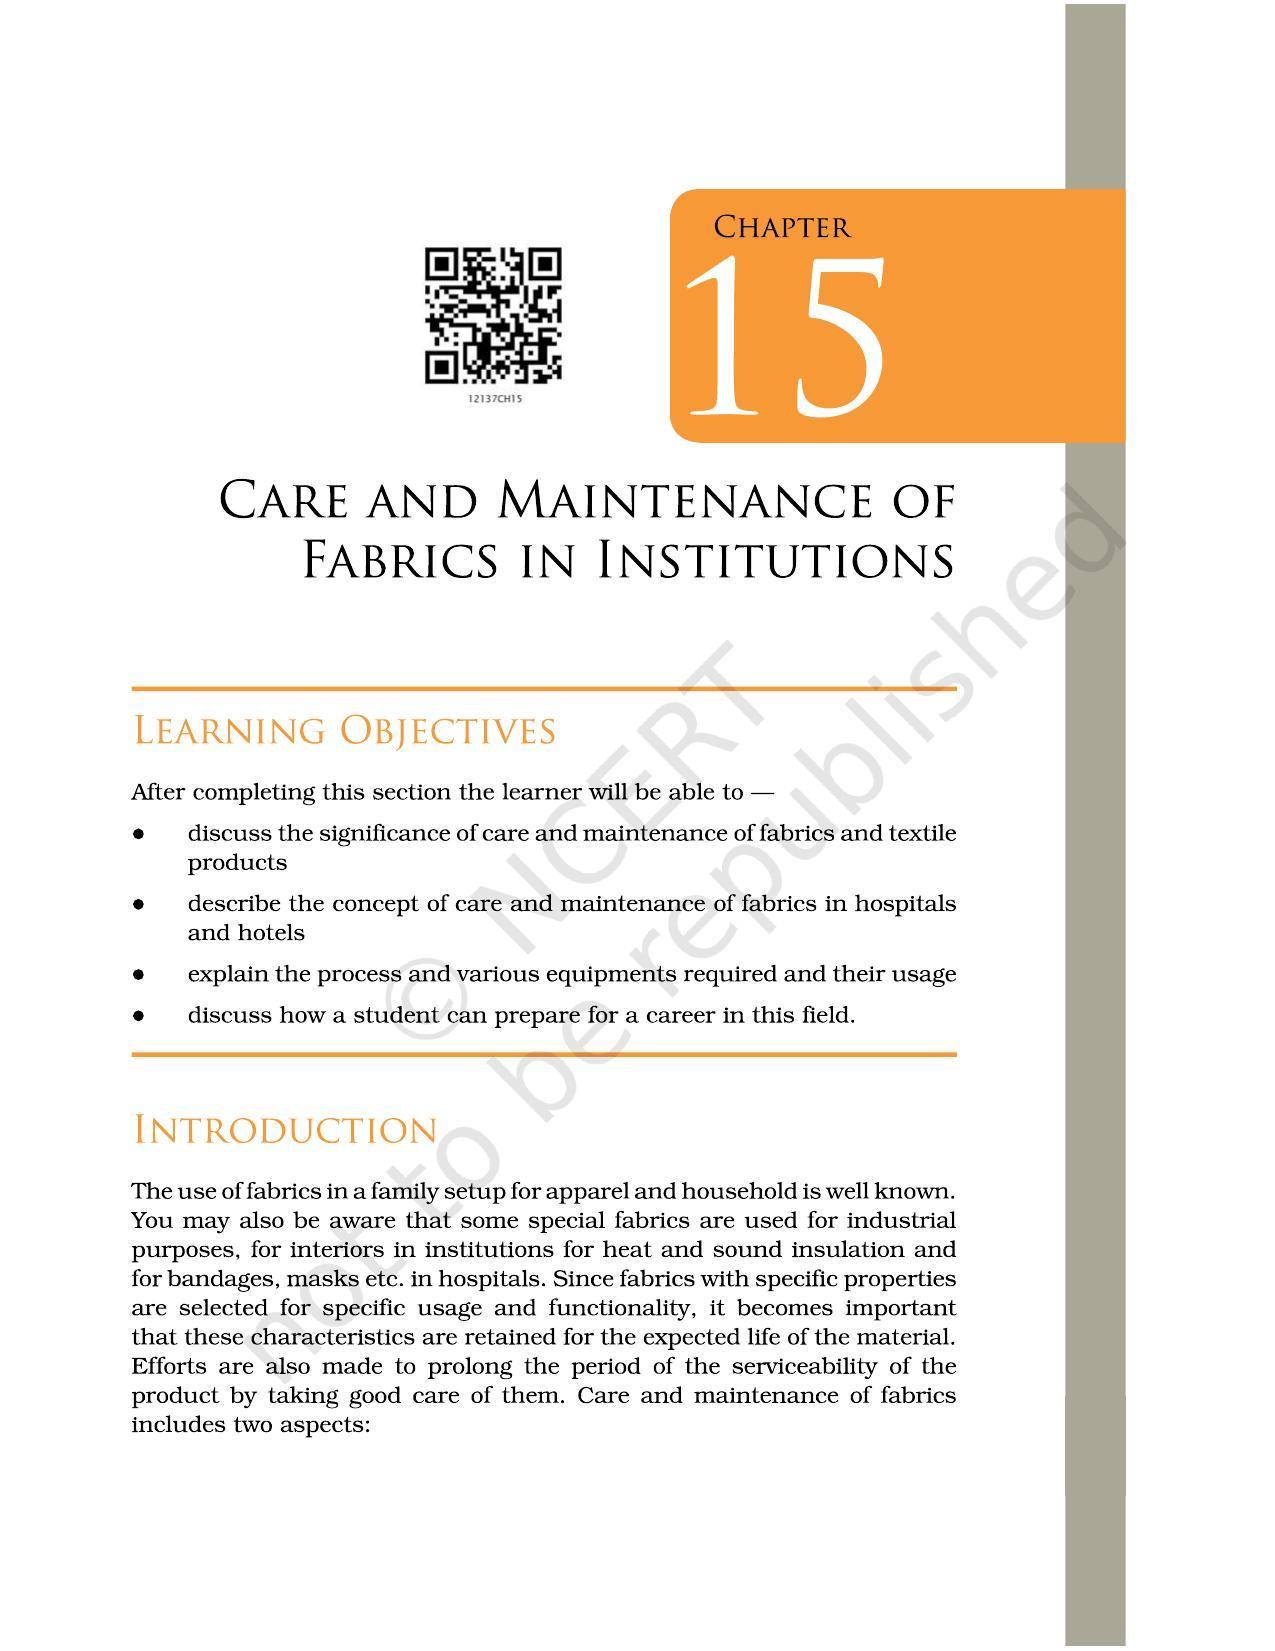 NCERT Book for Class 12 Home Science (Part -II) Chapter 15 Care and Maintenance of Fabrics in Institutions - Page 1